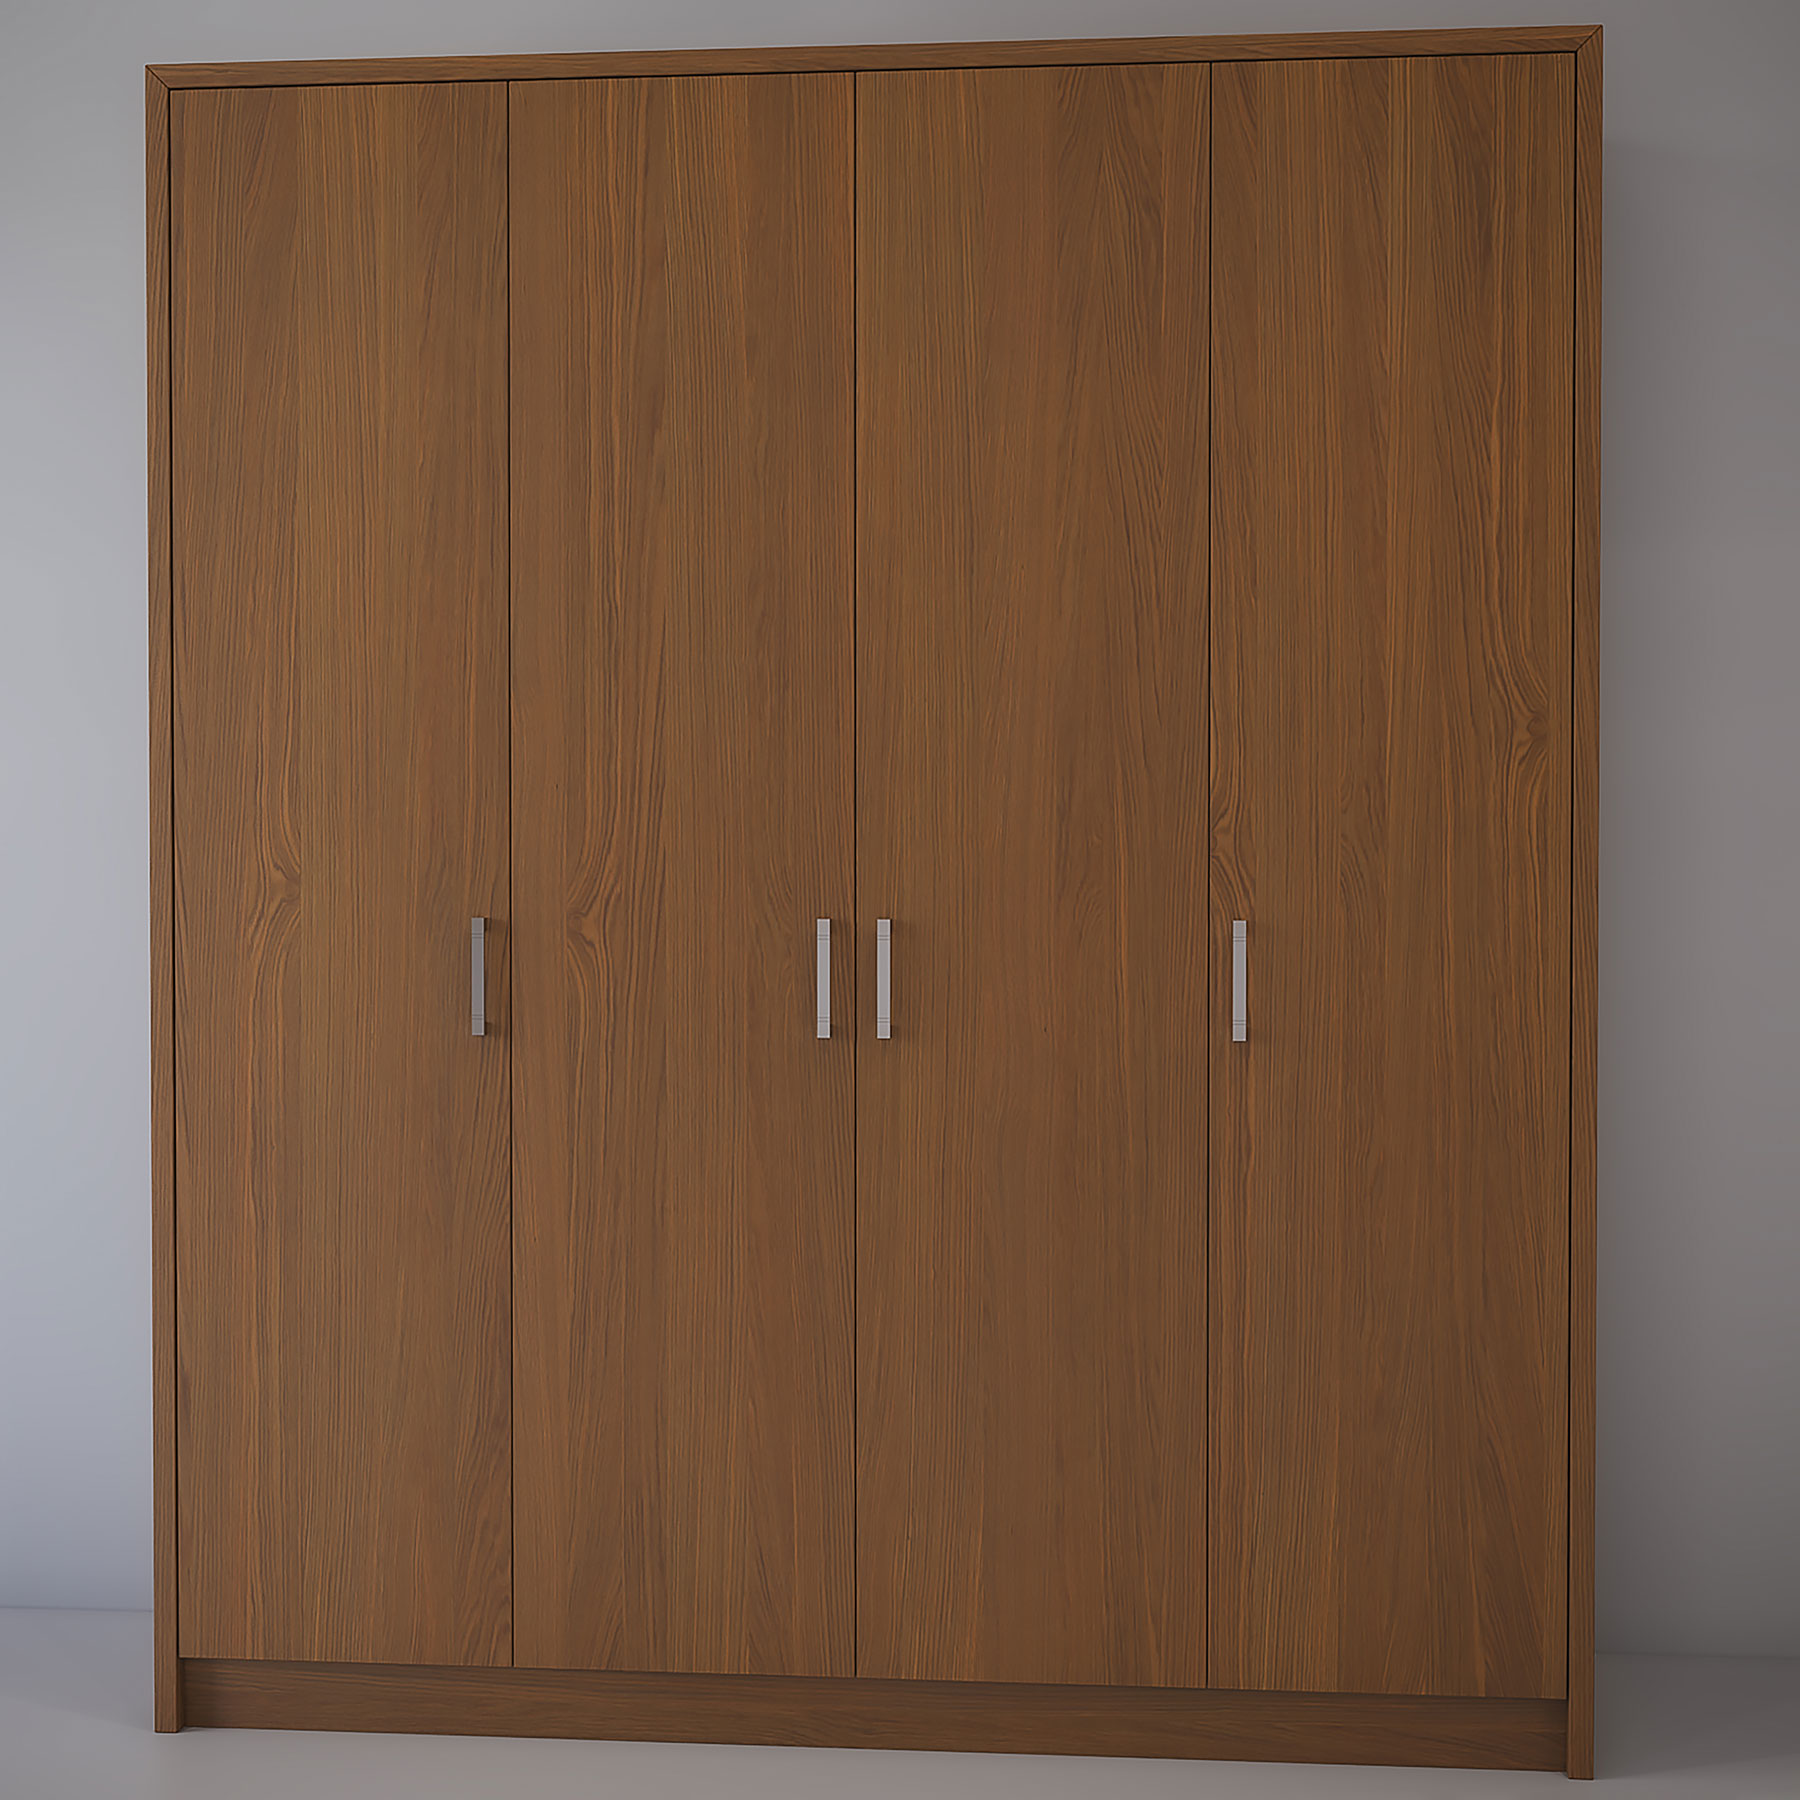 A four-door wardrobe from the Verona collection 2